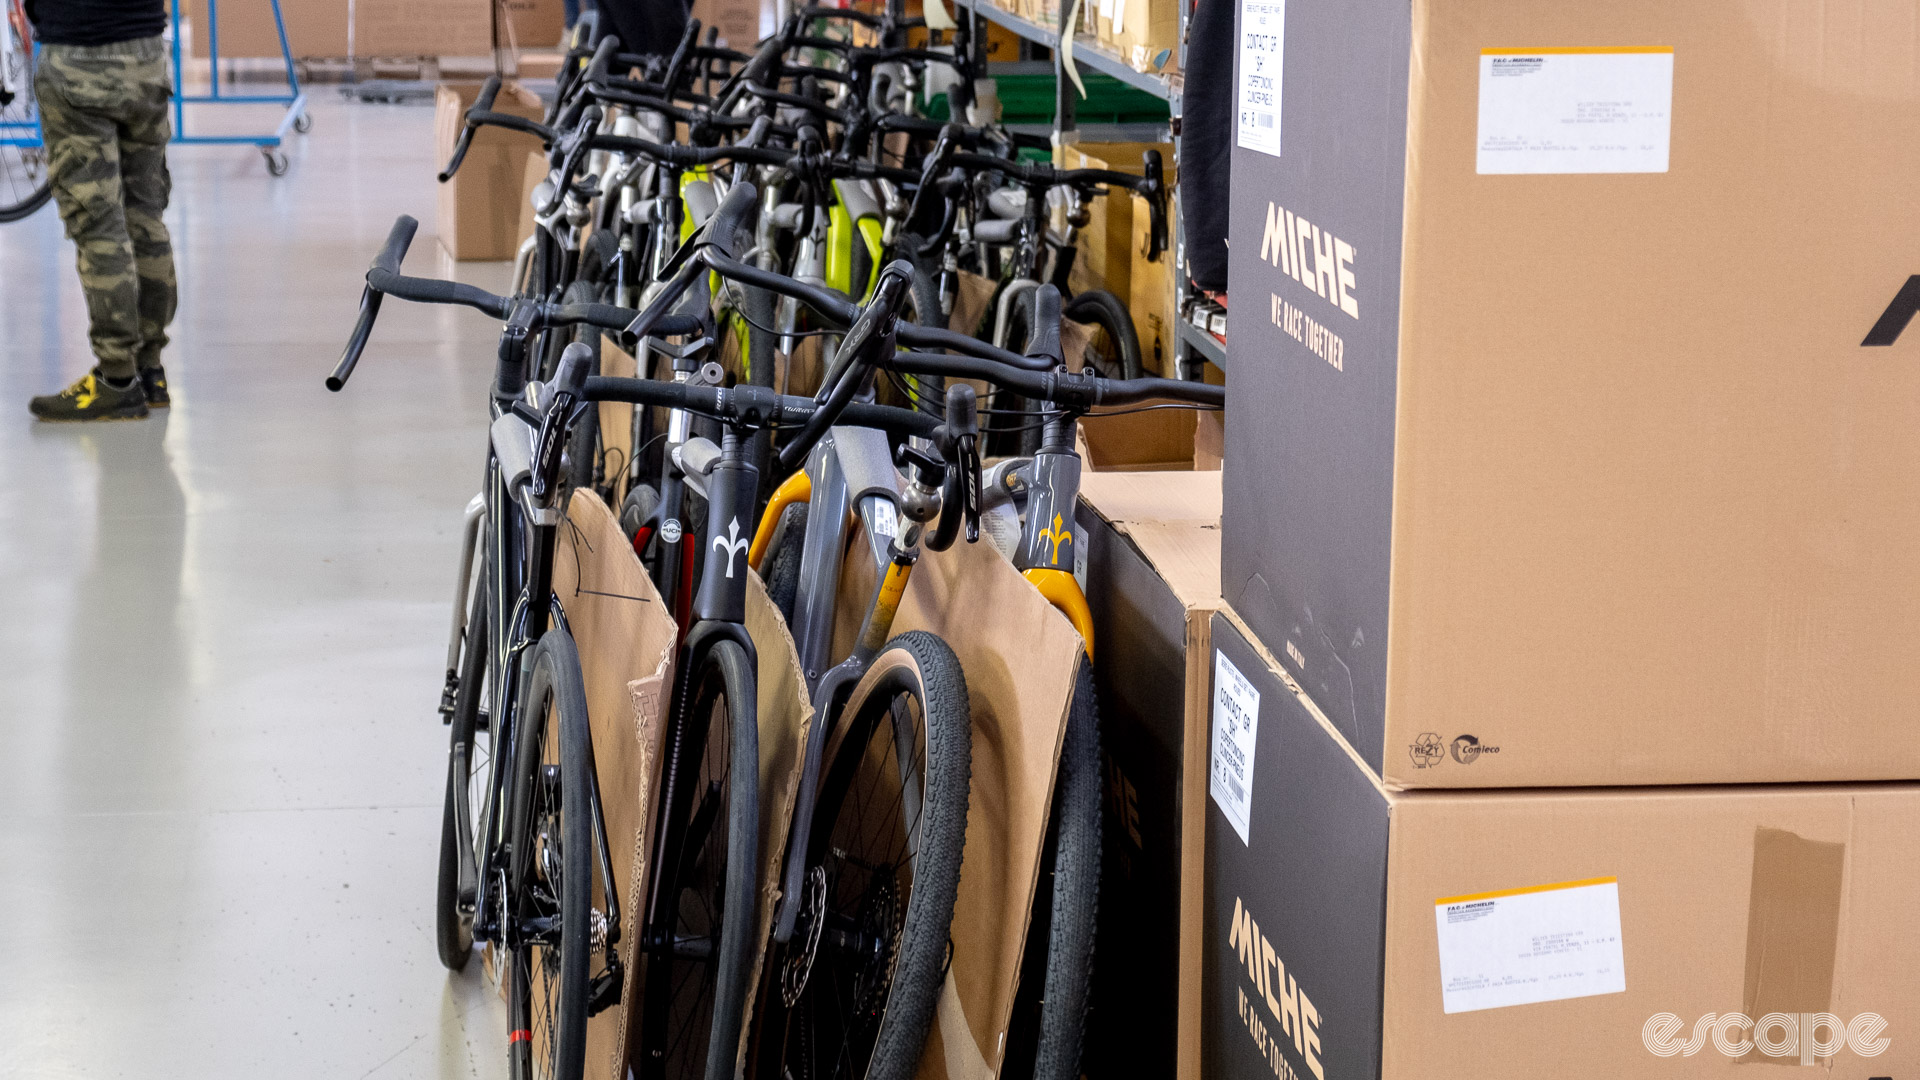 The photo shows a group of completed bikes waiting to be boxed. 